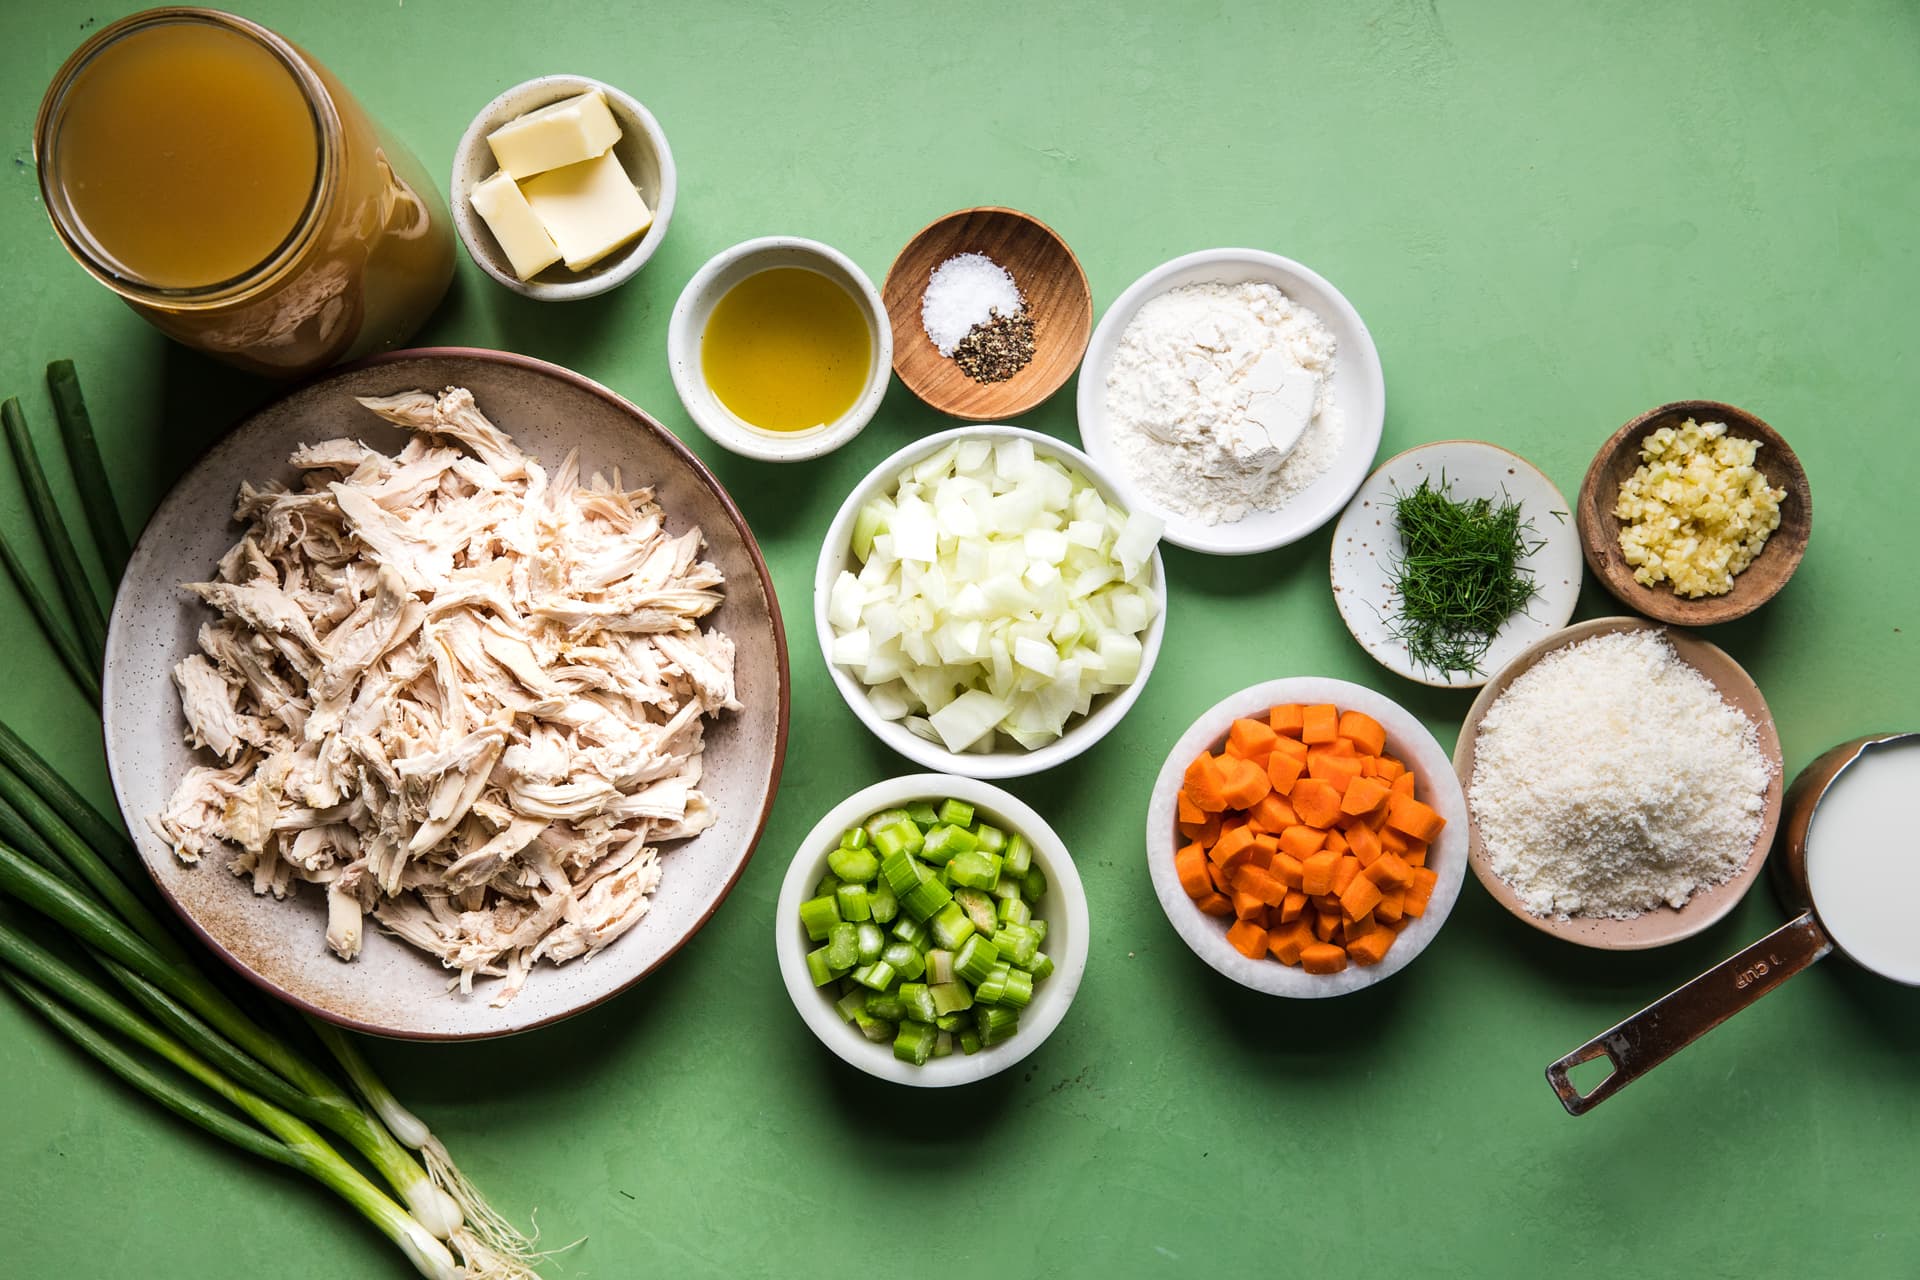 Shredded chicken, stock, green onions, rice, garlic, carrots and celery for creamy chicken soup in bowls on the counter